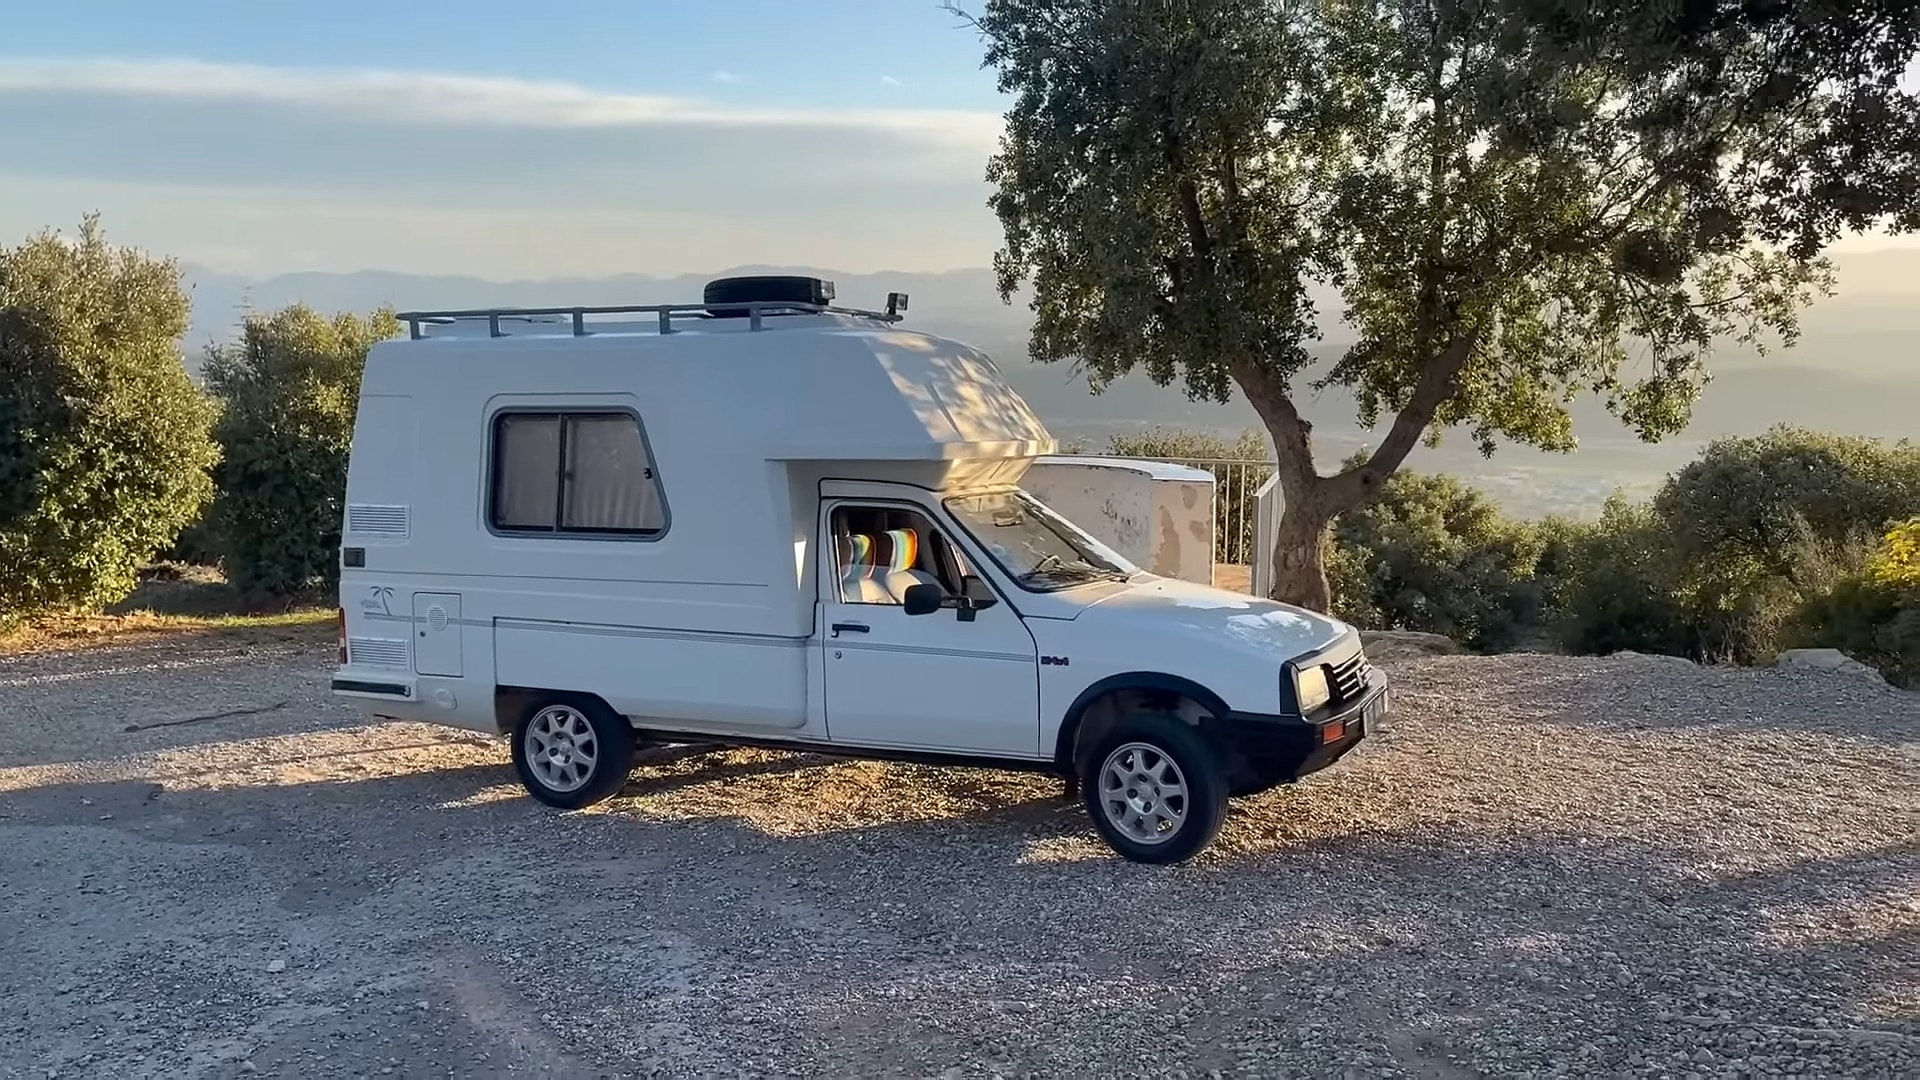 1990 Citroen C15 Autostar Is a Tiny Home on Wheels and the Last of